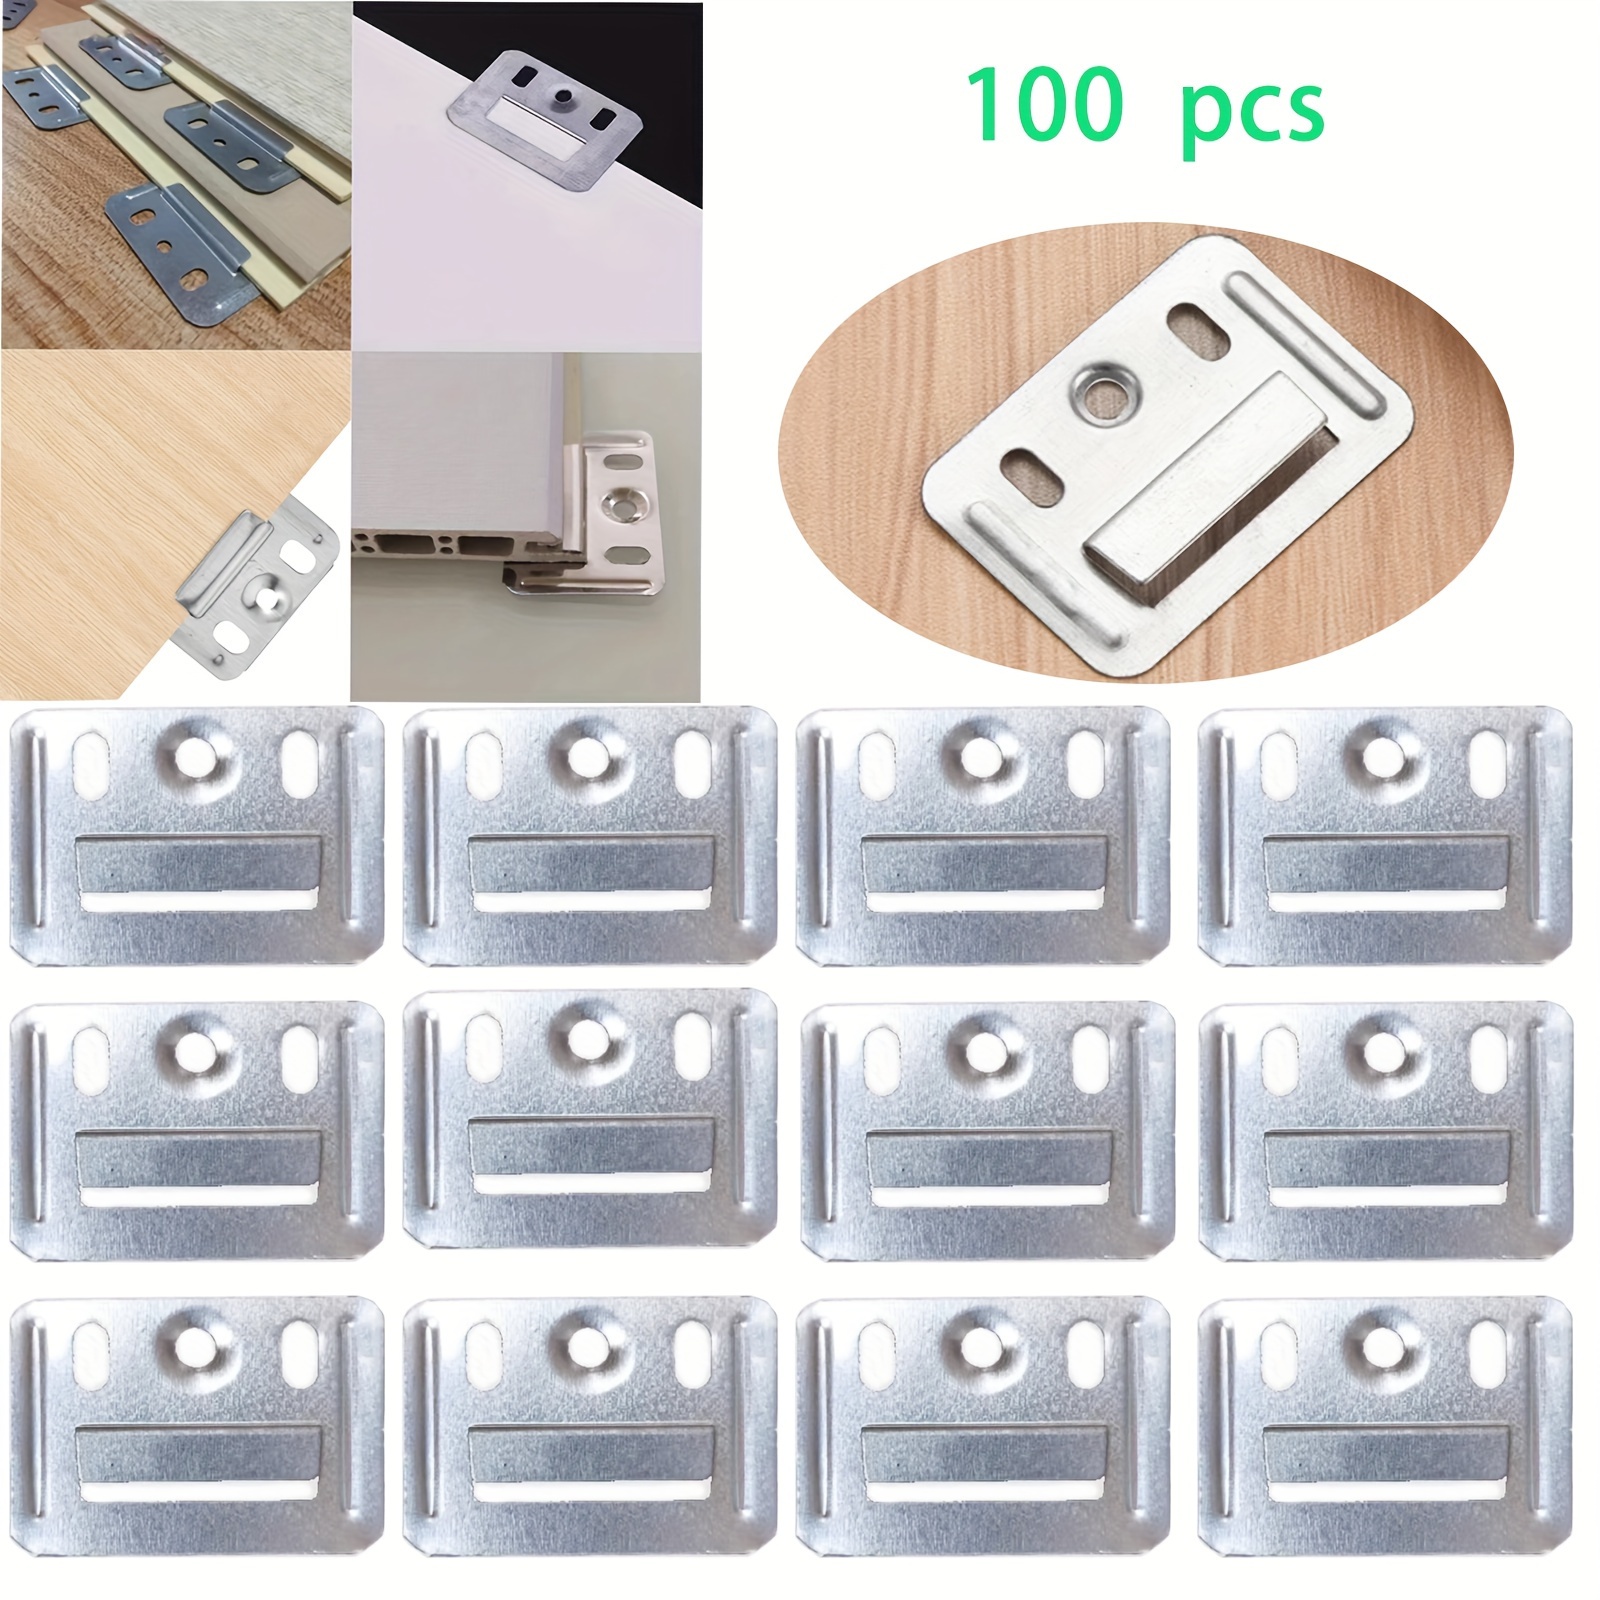 

100-pack Metal Picture Hangers For Wall Panel Ceiling Board Installation, Universal Mounting Clip Brackets For Bamboo Fiber, Pvc Panels & Decorative Interior Ceiling Boards